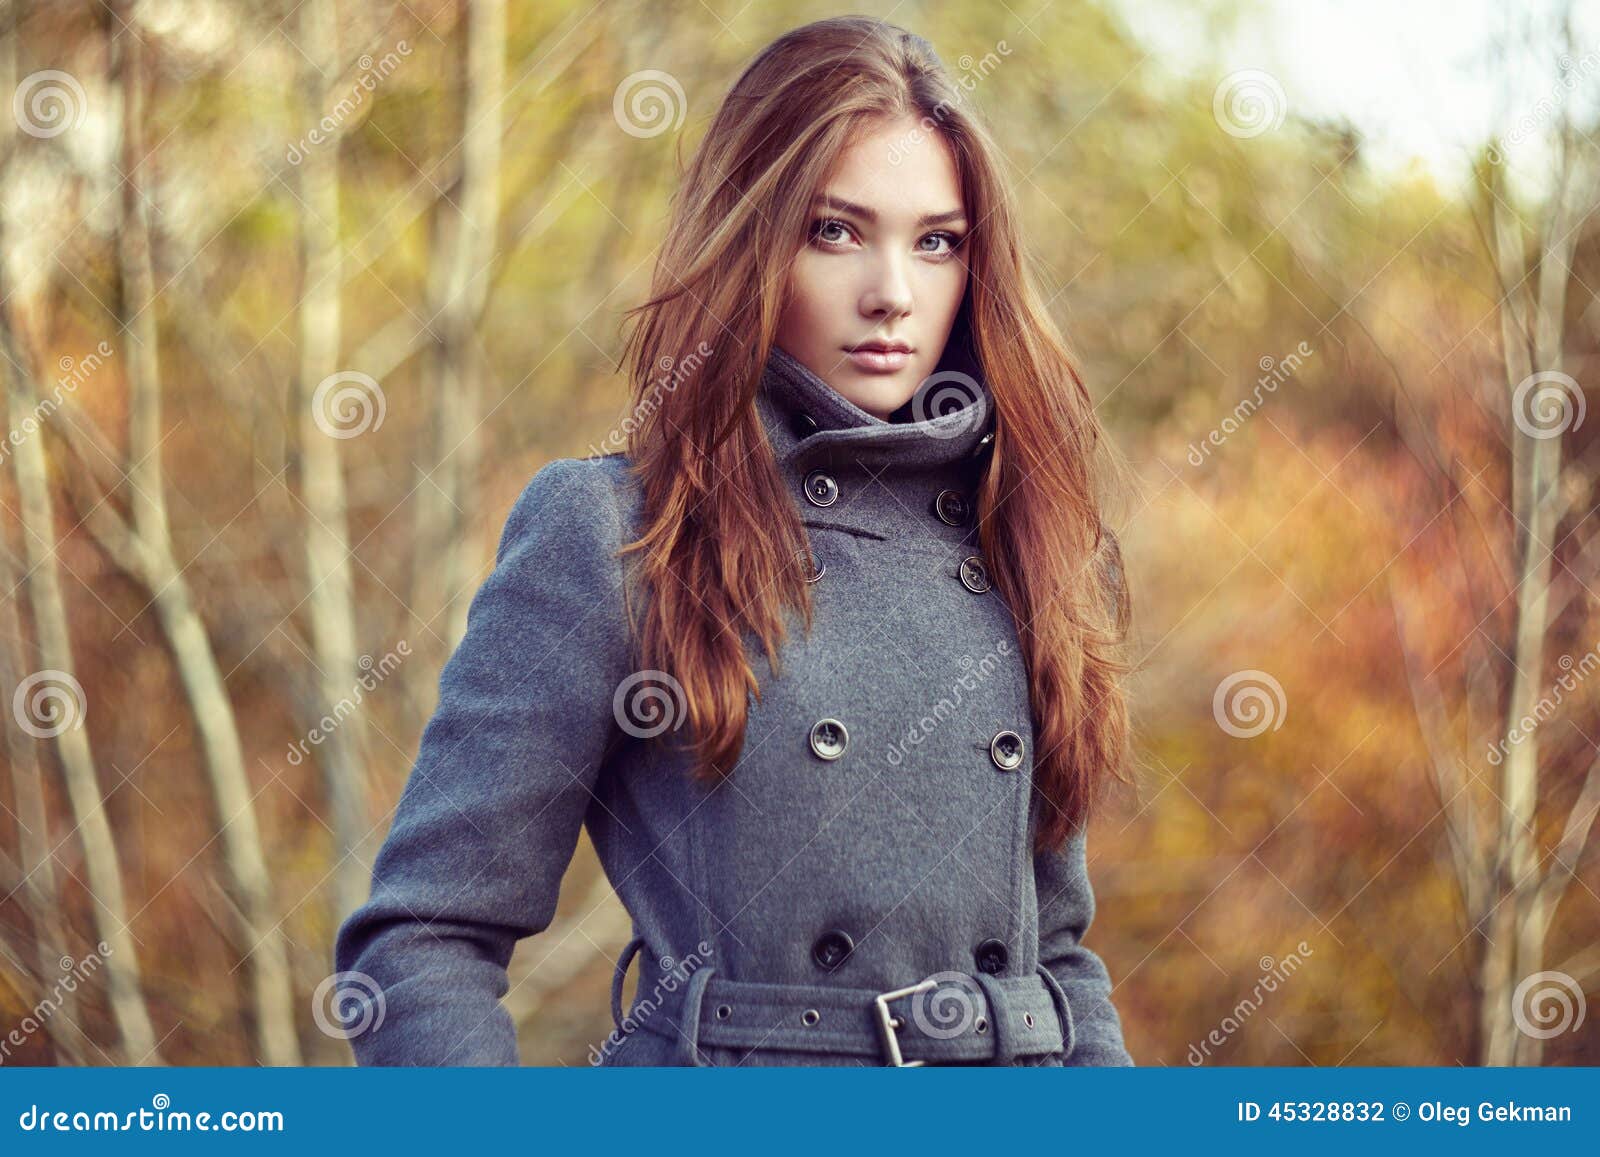 portrait of young beautiful woman in autumn coat